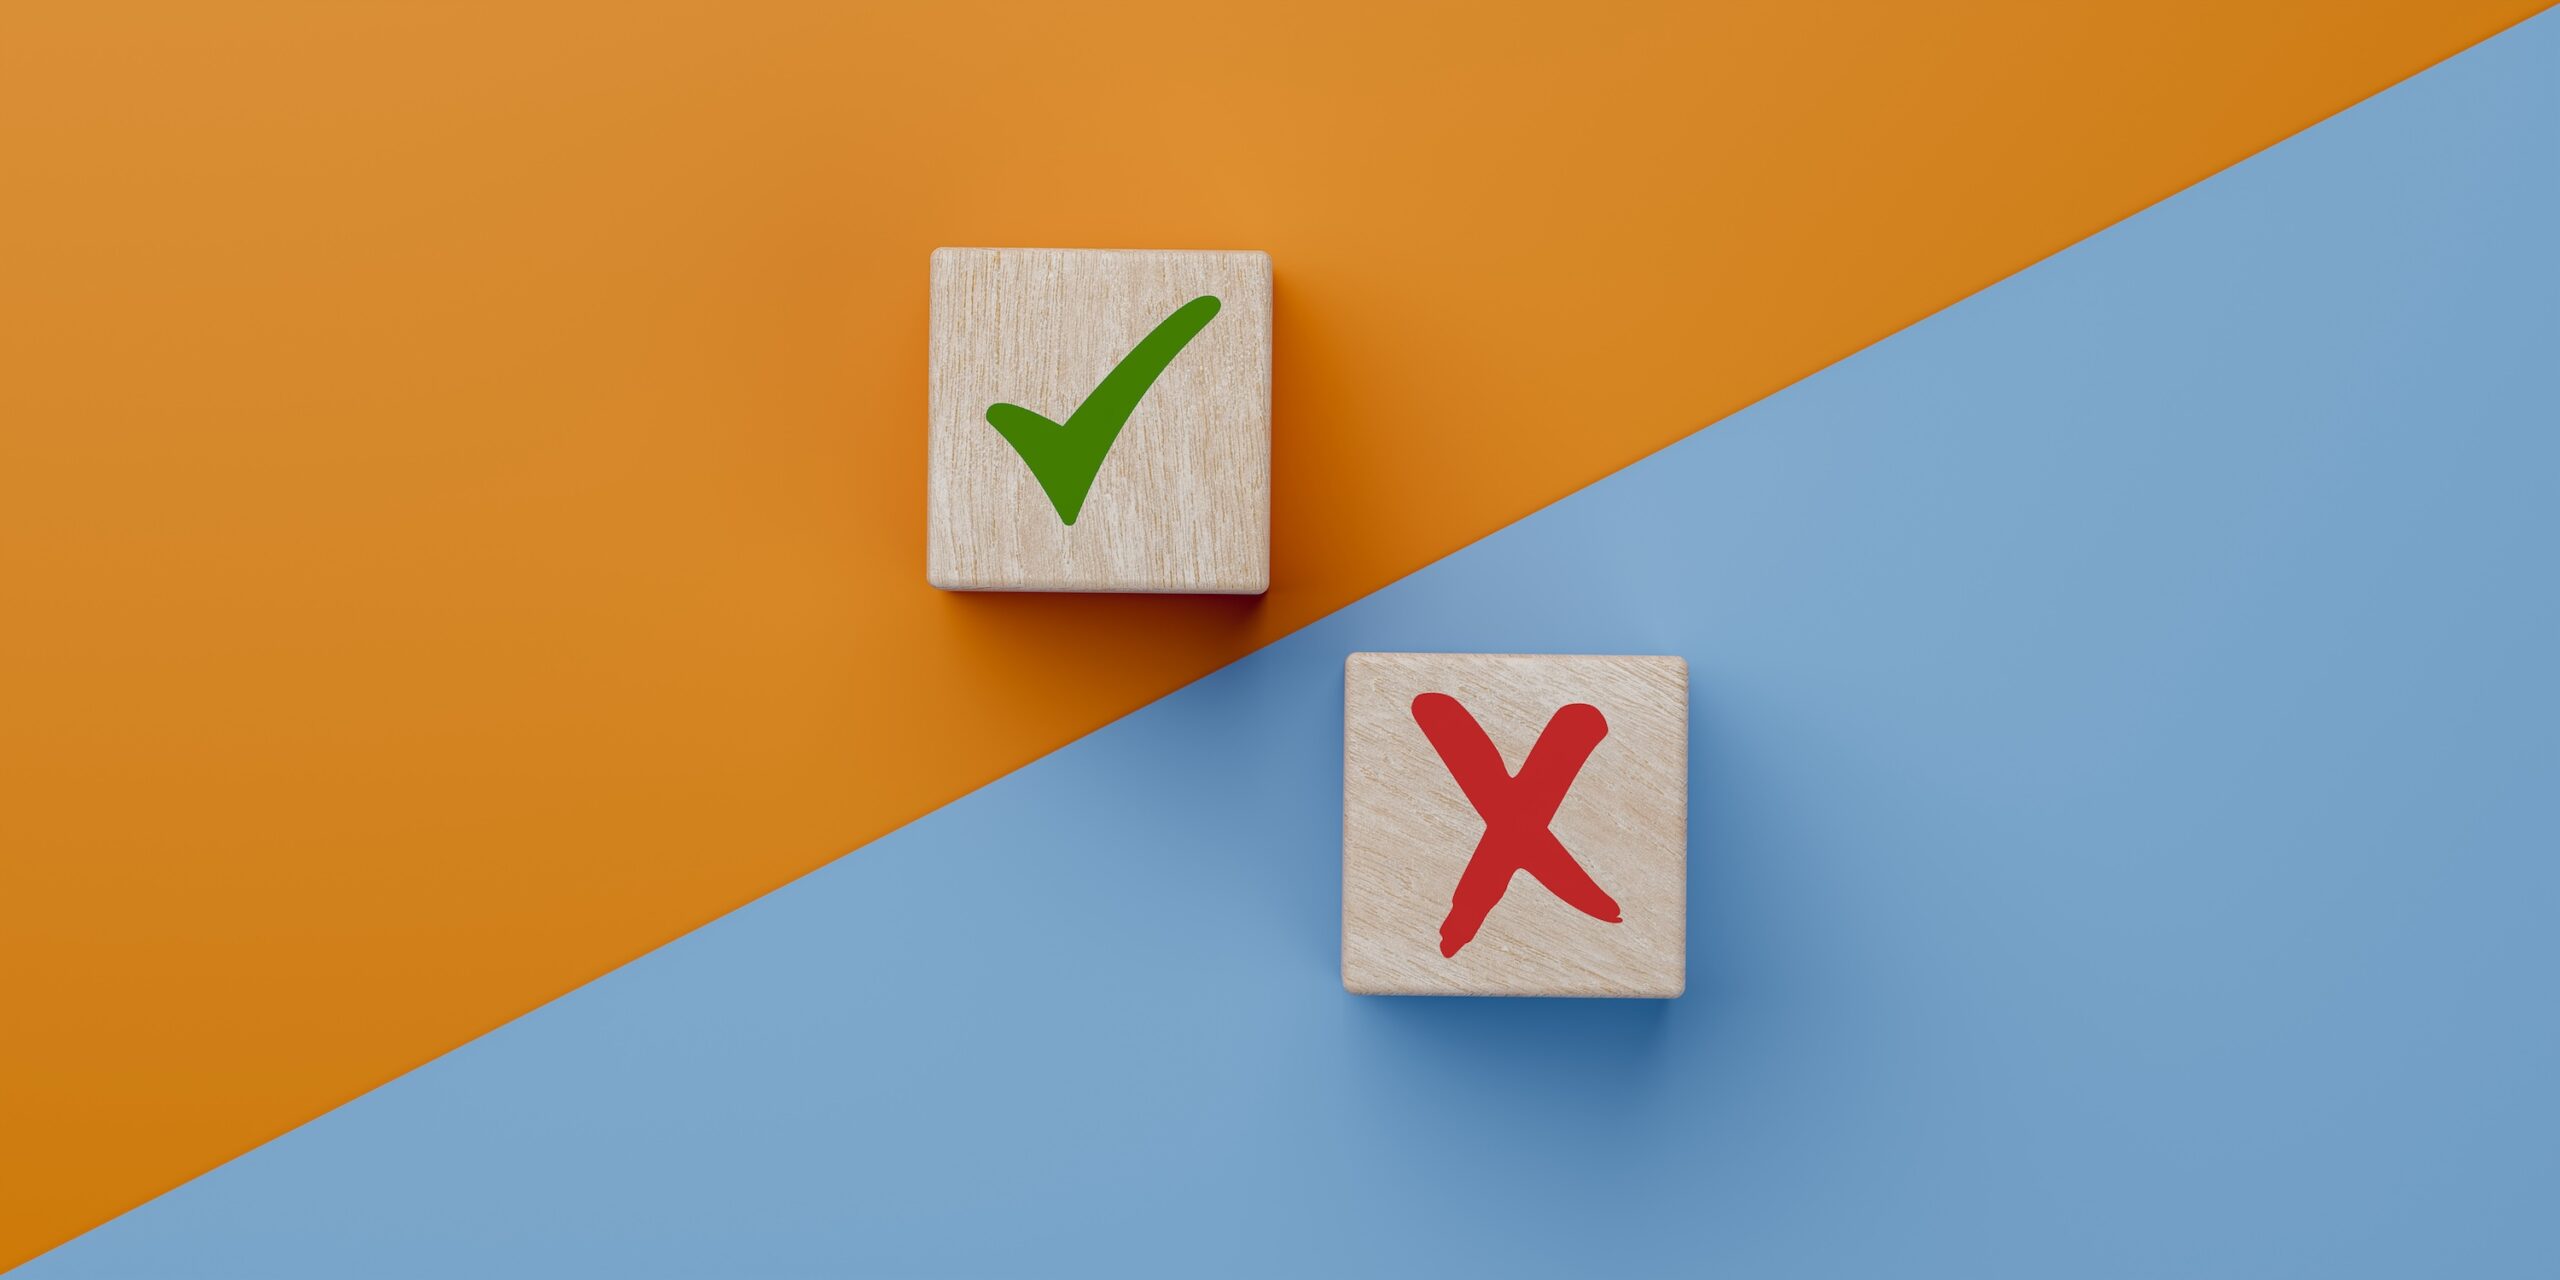 Home Downsizing. A rectangular image with two wooden cubes, one on the top left a check mark green tick and the lower right cube a red cross mark ‘x’. The pros and cons of a Reverse Mortgage.